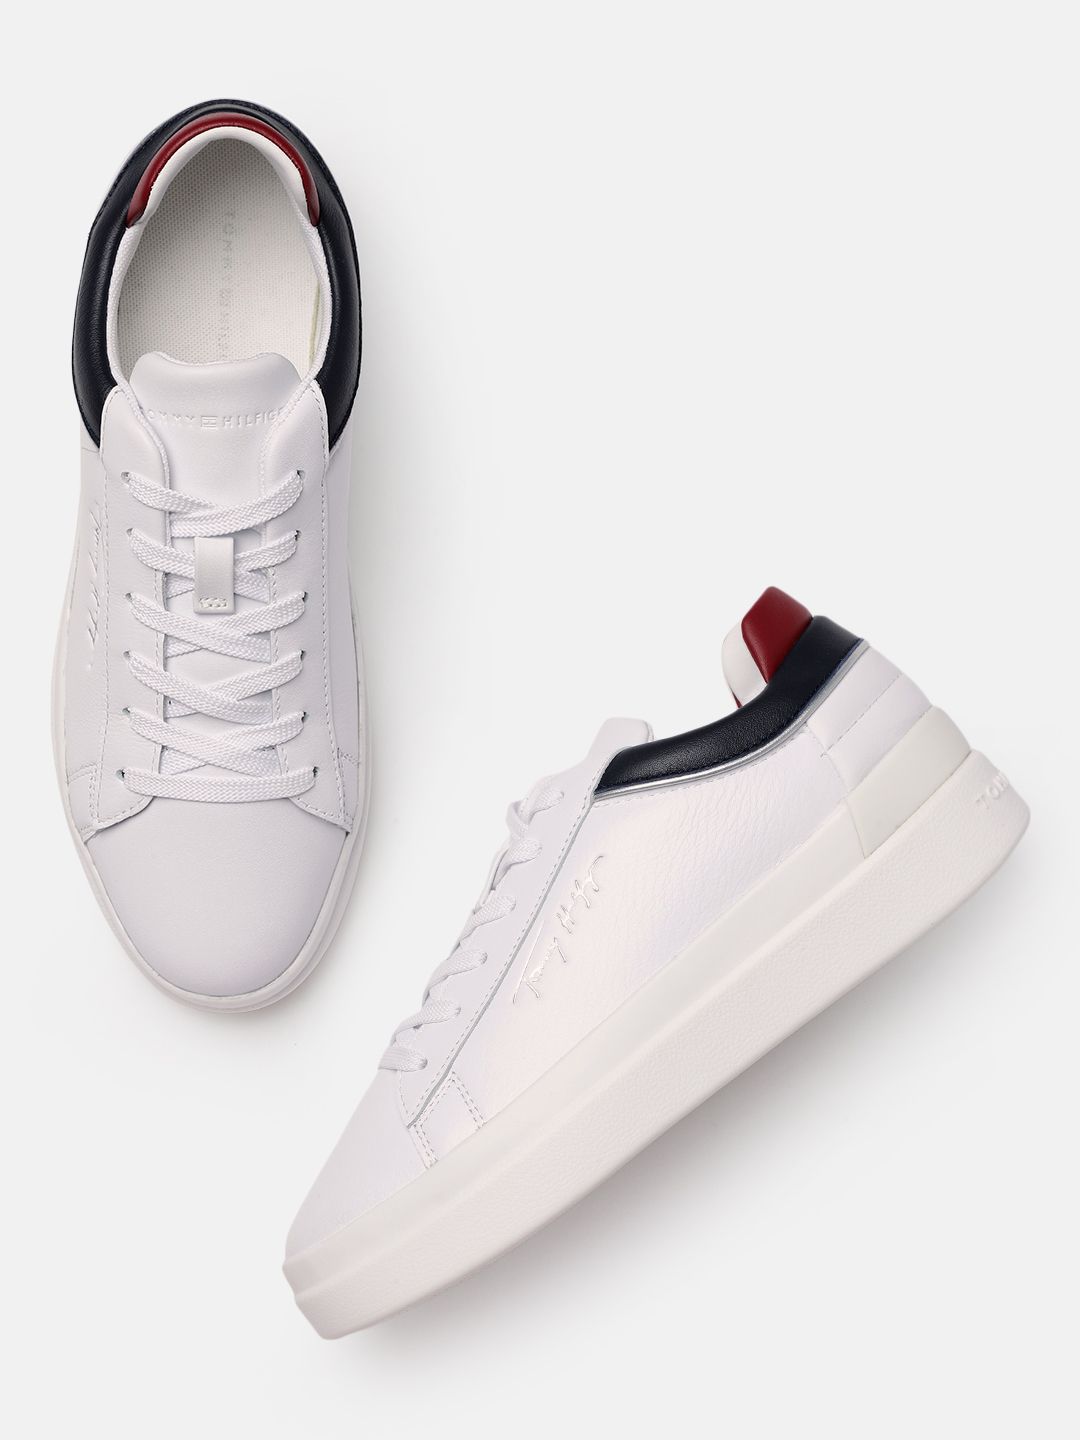 Tommy Hilfiger Women White Solid Leather Regular Sneakers with Brand Logo Embossed Detail Price in India